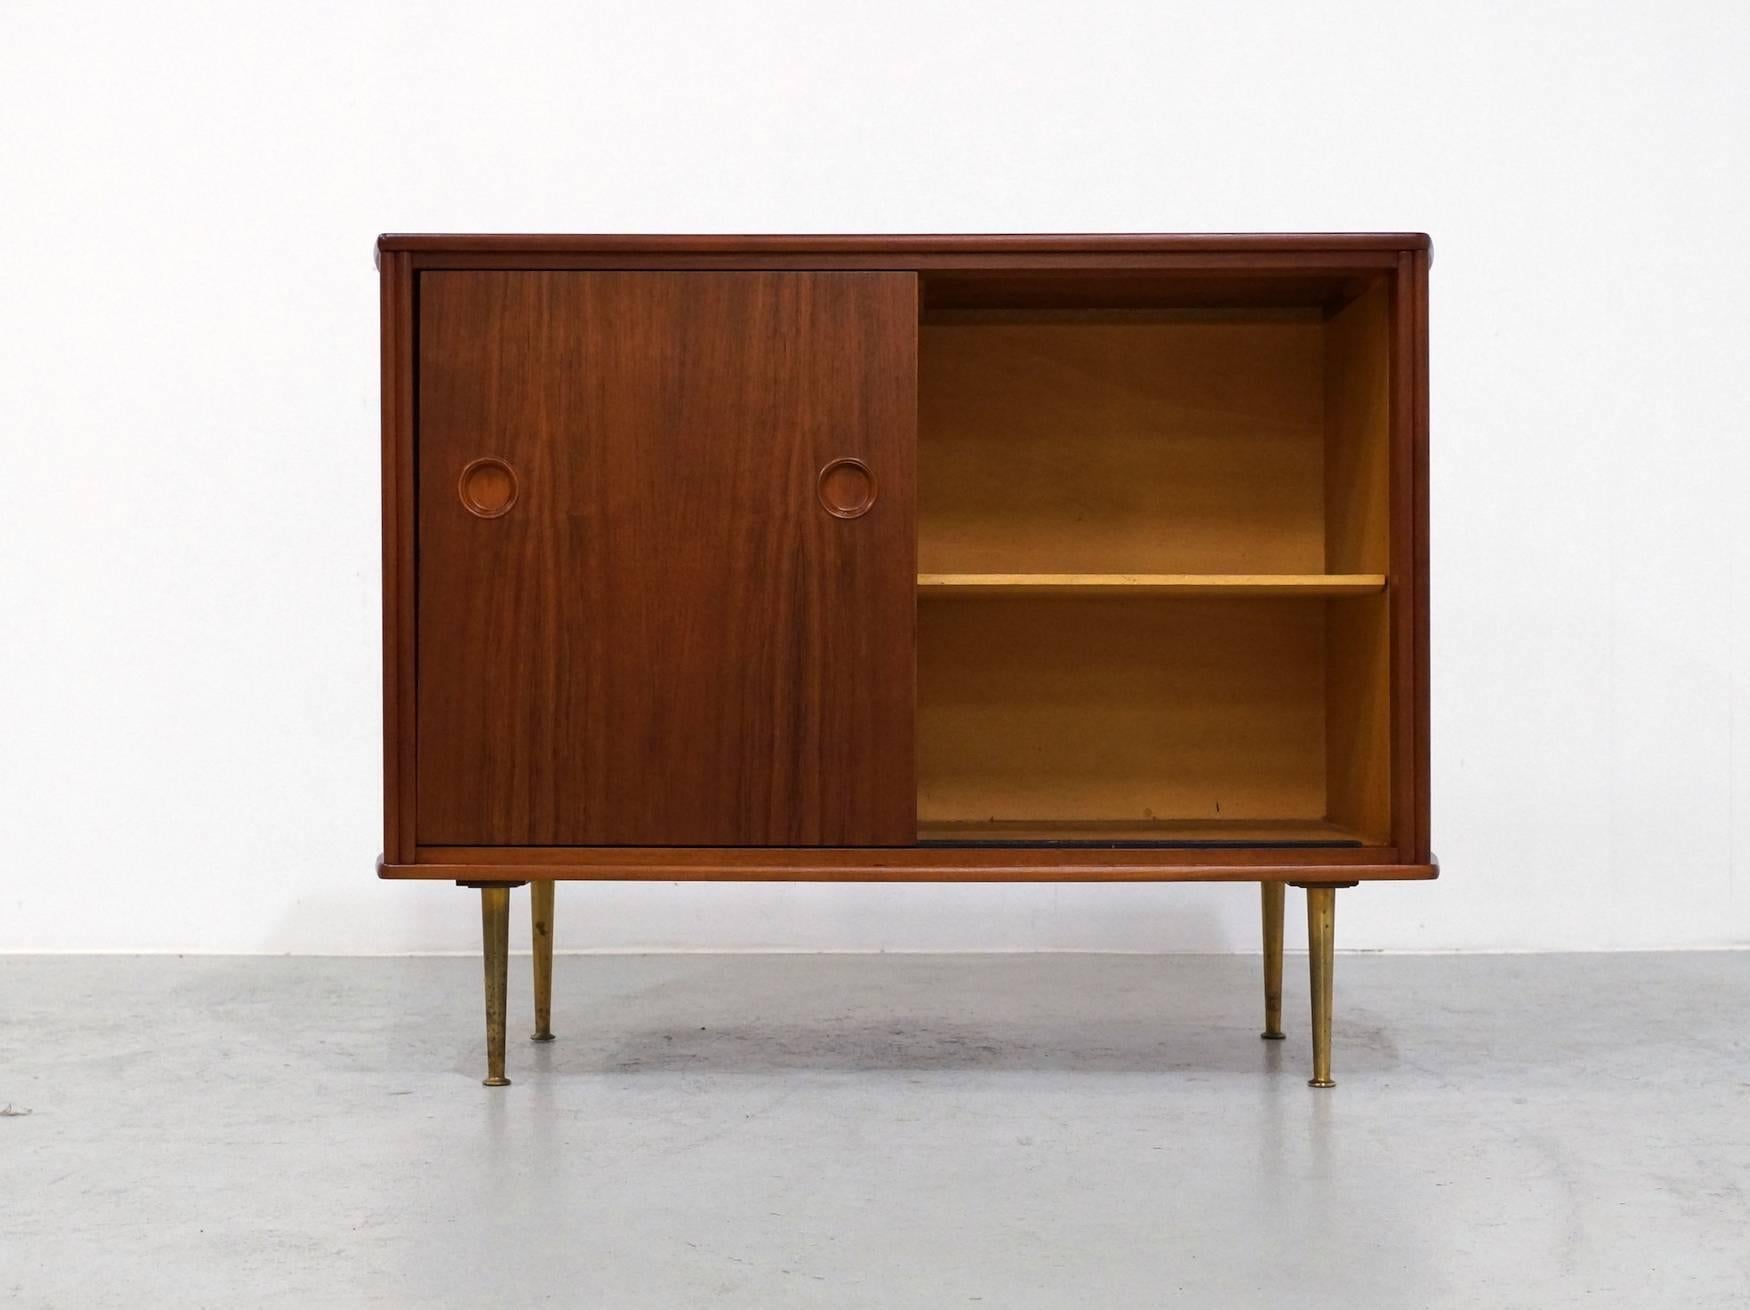 Early 1960s small walnut cabinet designed by William Watting and made by Fristo in The Netherlands.
This small curved cabinet stands on brass legs and contains a cupboard behind the sliding doors. 
It's professional refinished with UV and water